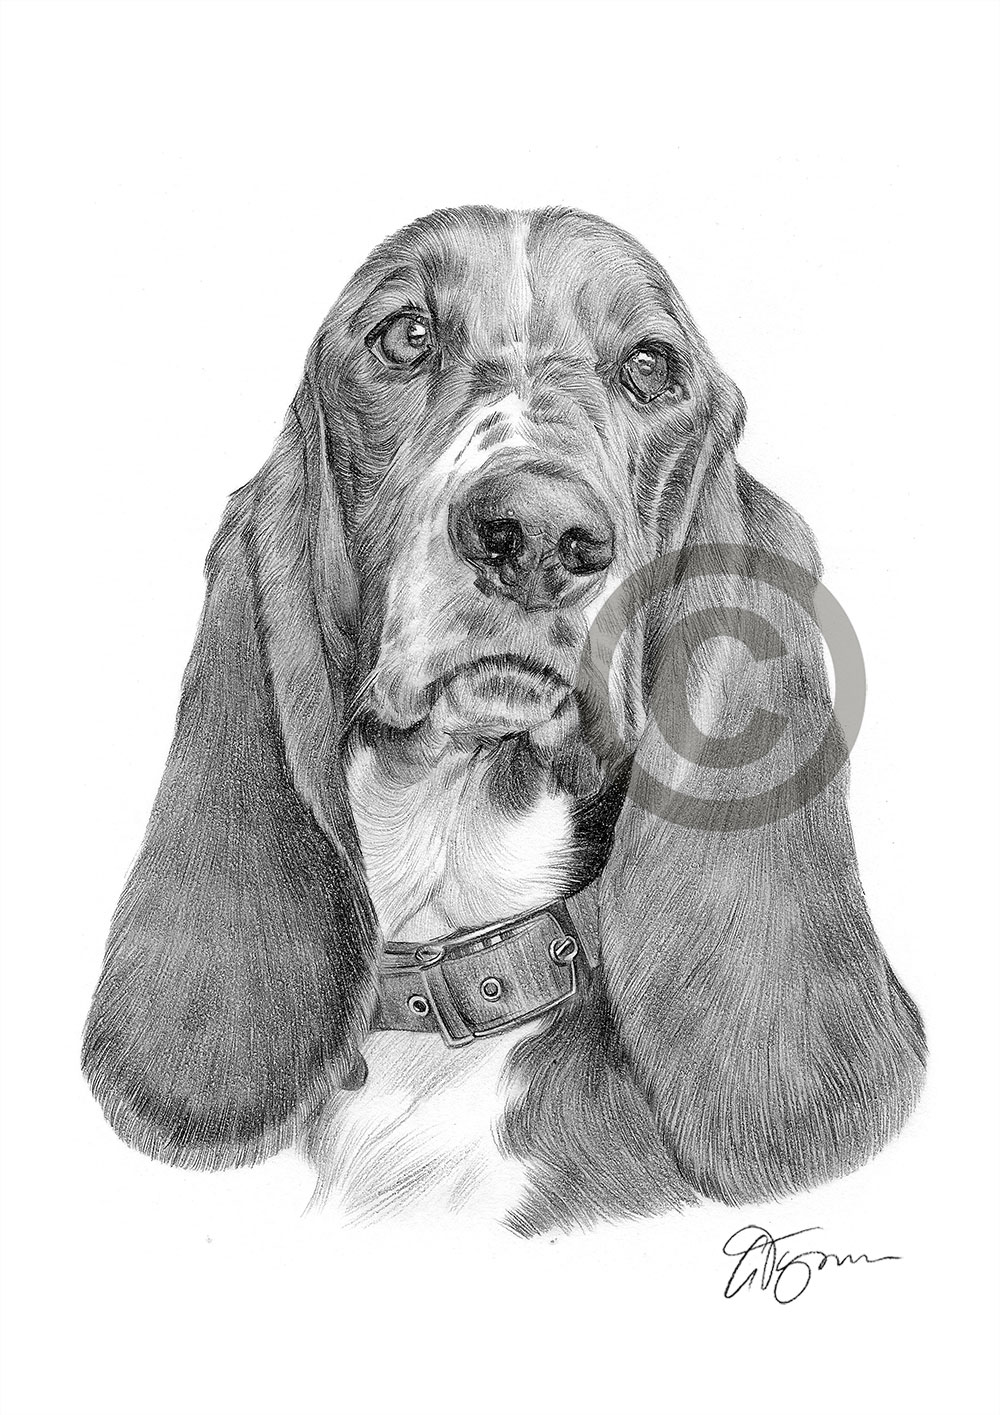 Pencil drawing of a Basset Hound by artist Gary Tymon